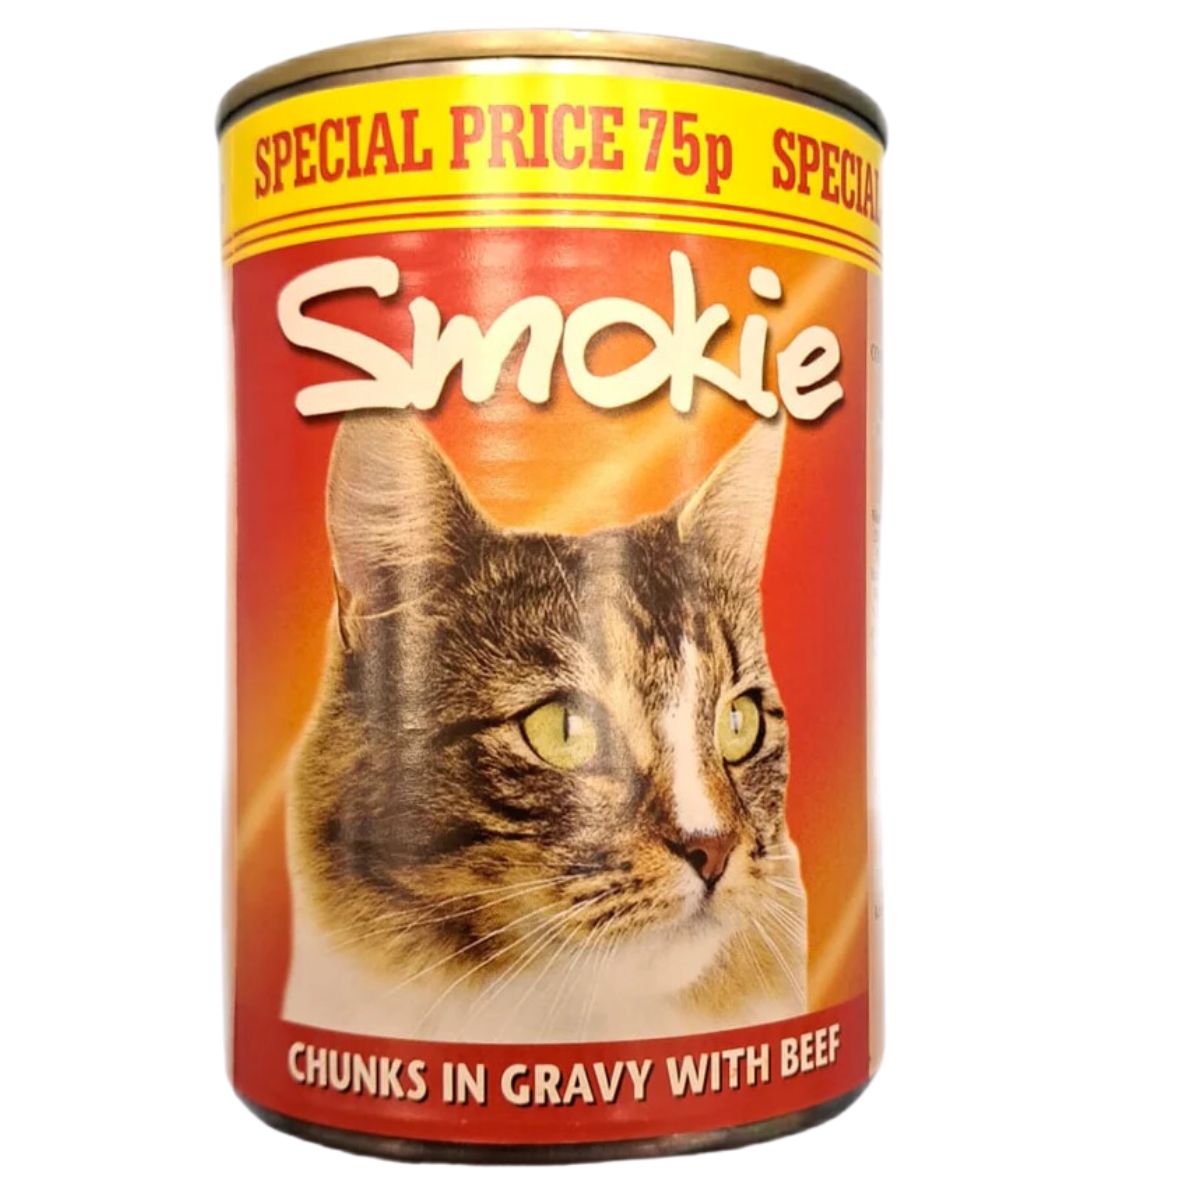 A can of Smokie - Chunks in Gravy with Beef - 400g cat food with a picture of a cat on it.